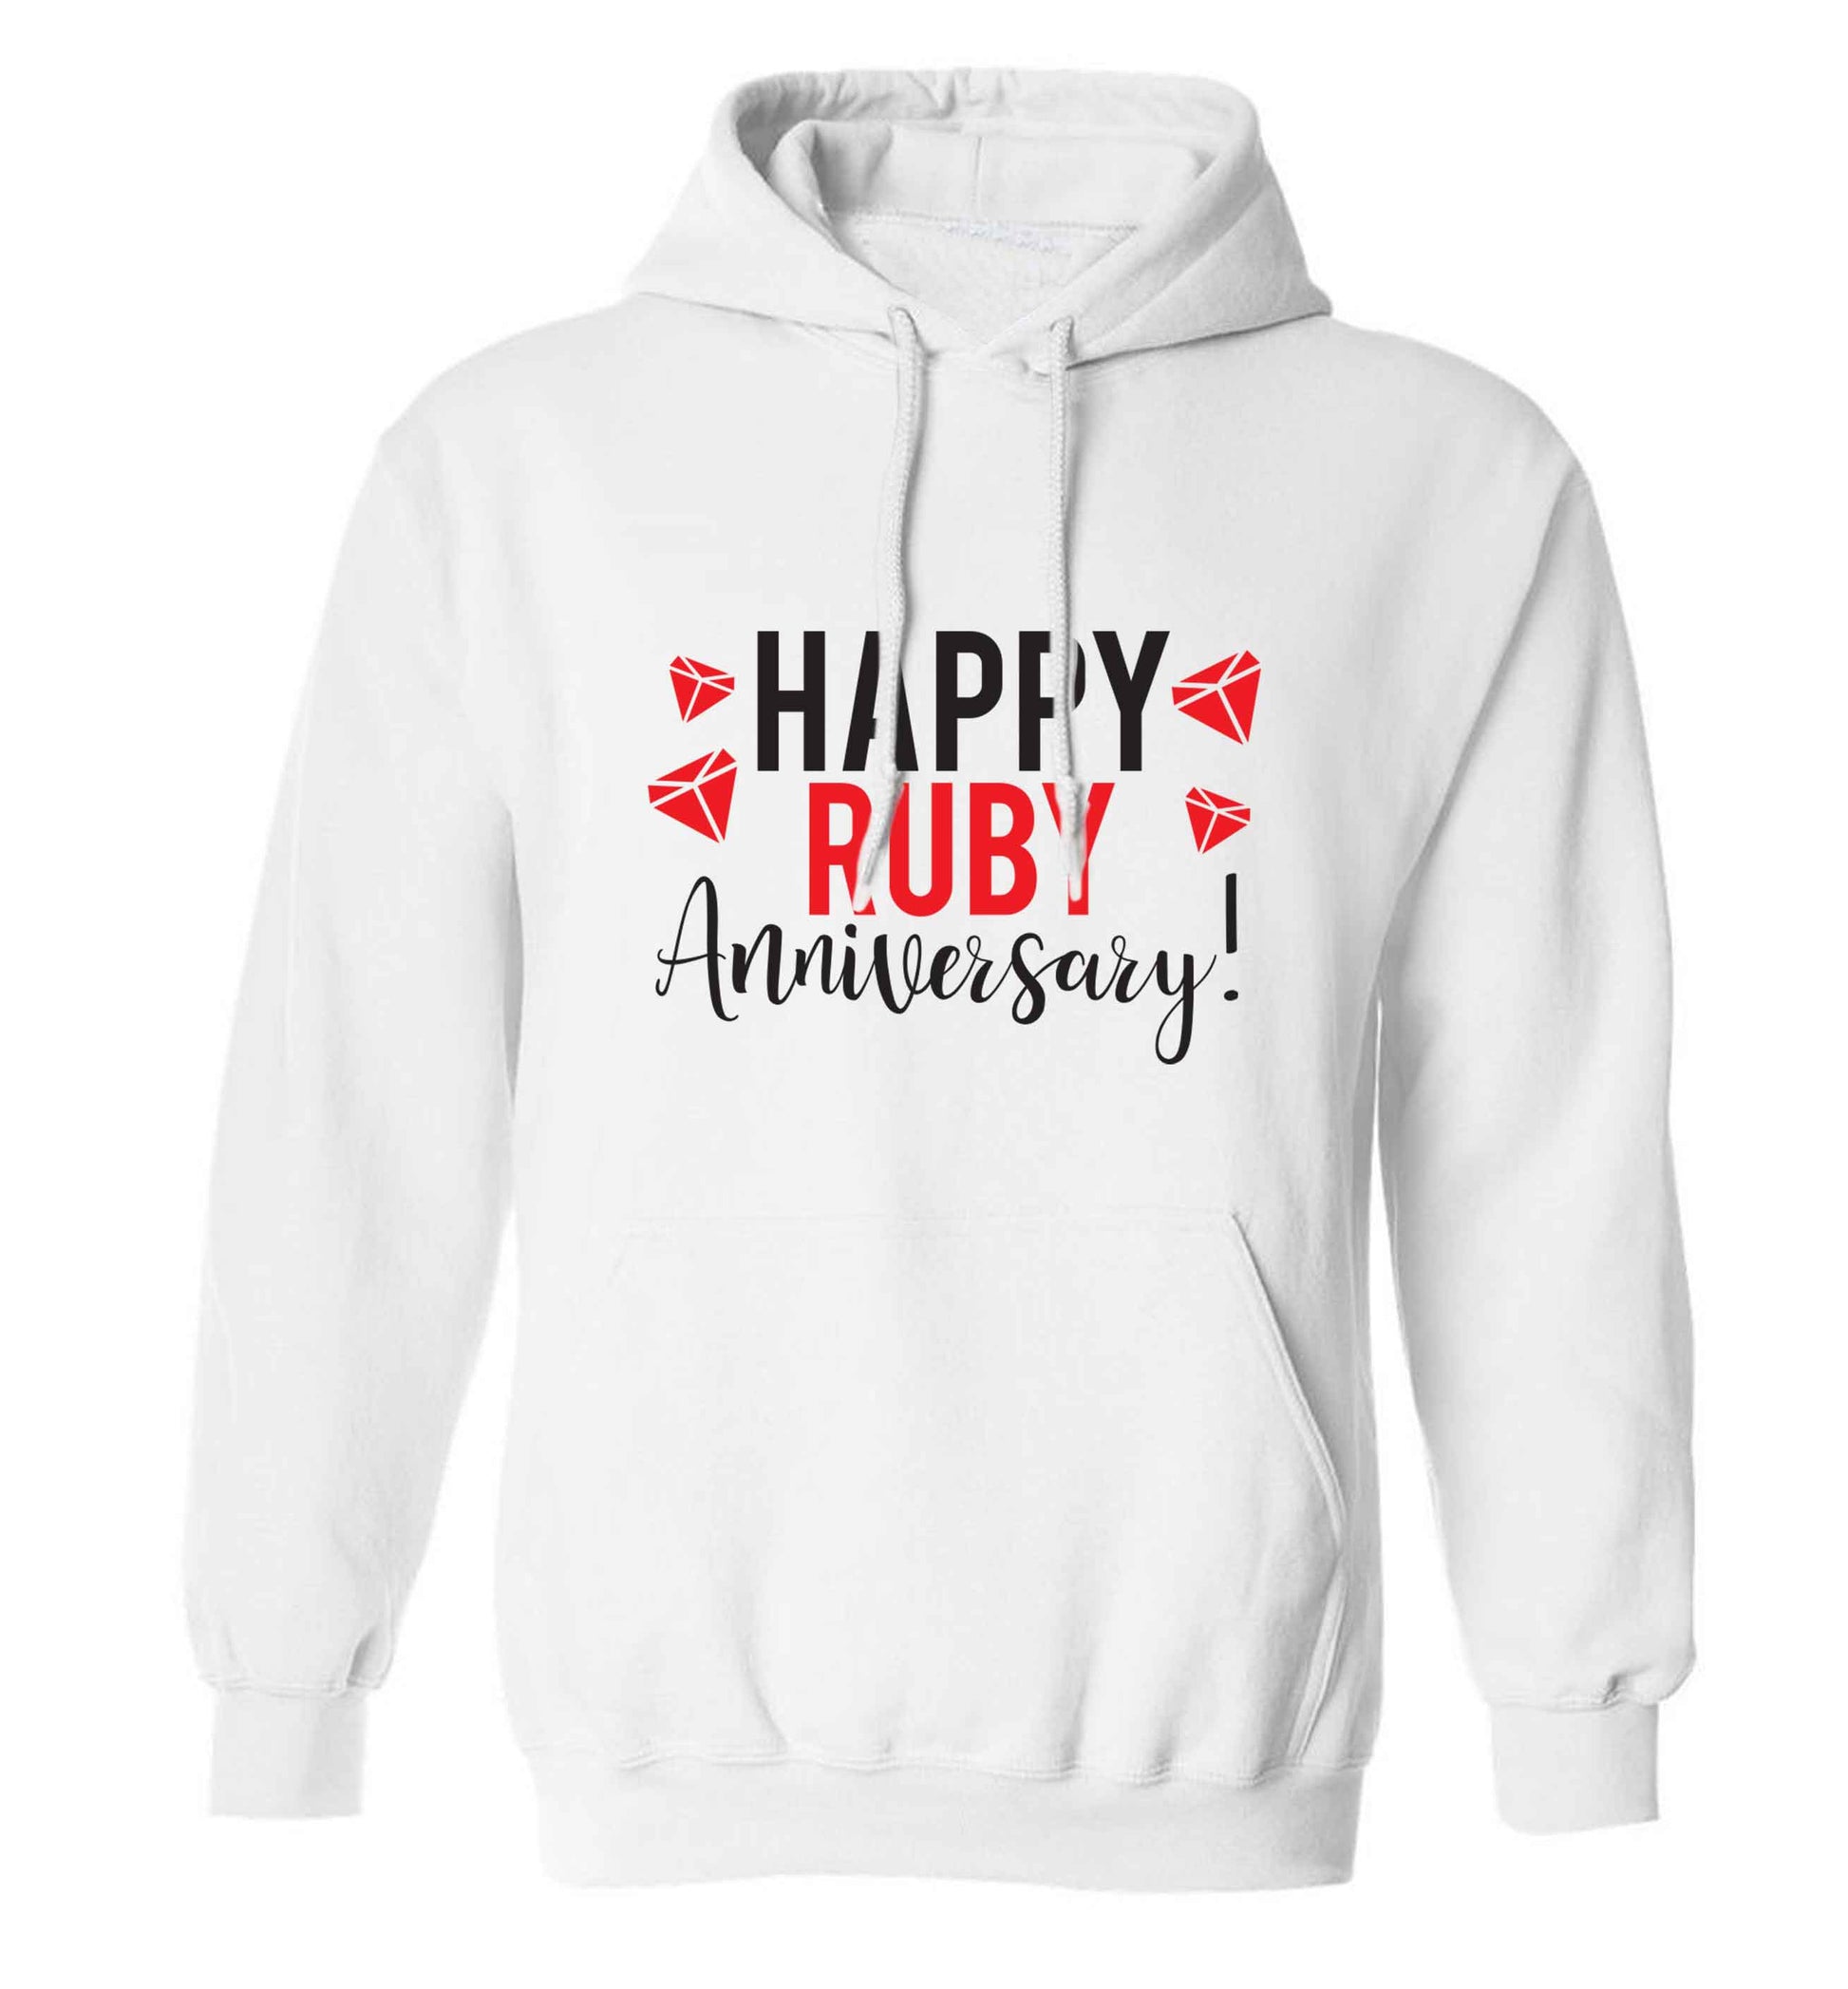 Happy ruby anniversary! adults unisex white hoodie 2XL